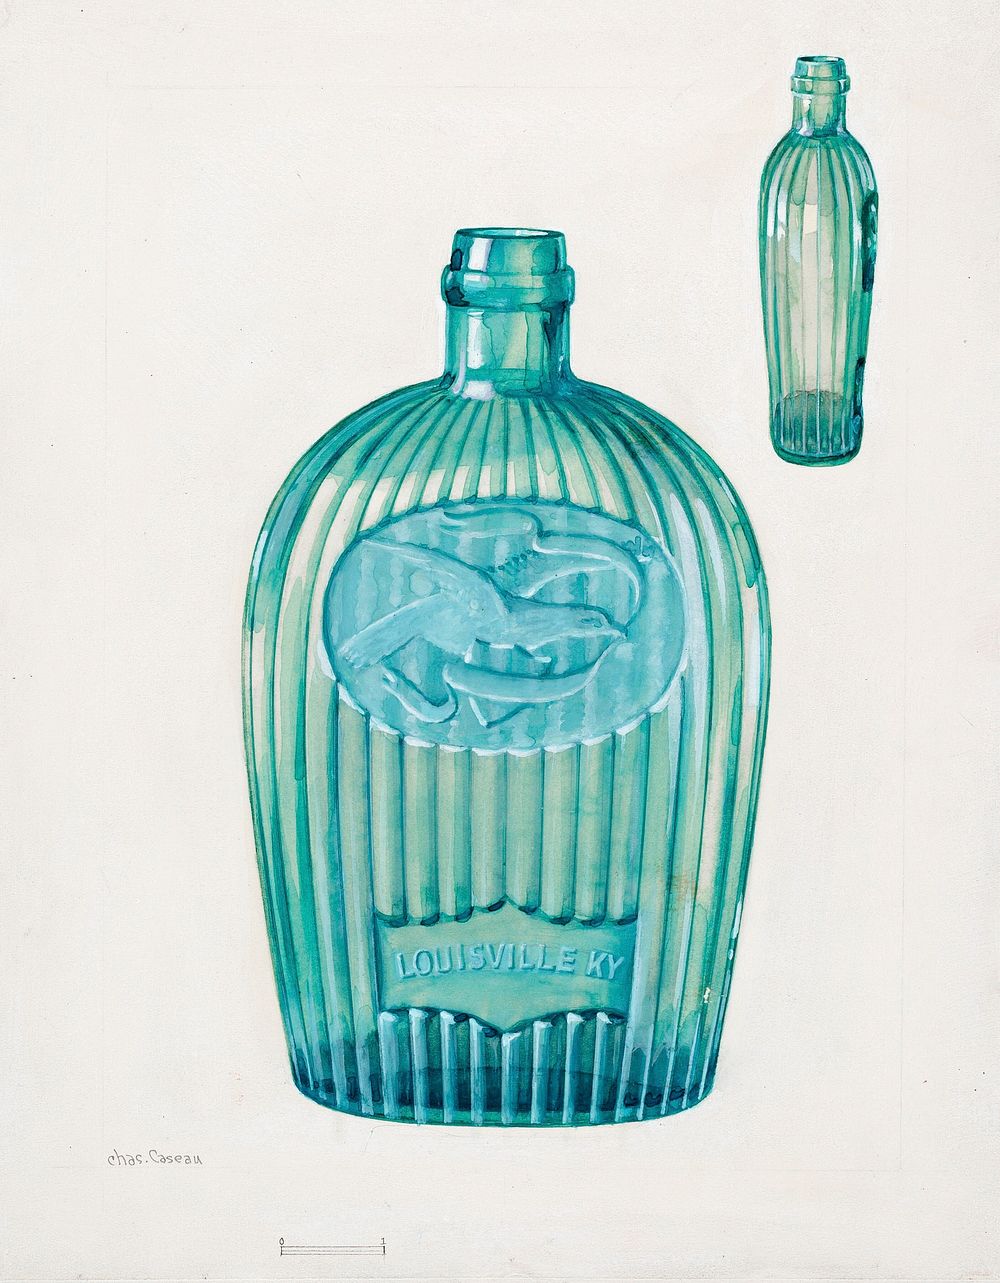 Flask (ca. 1936) by Charles Caseau. Original from The National Gallery of Art. Digitally enhanced by rawpixel.